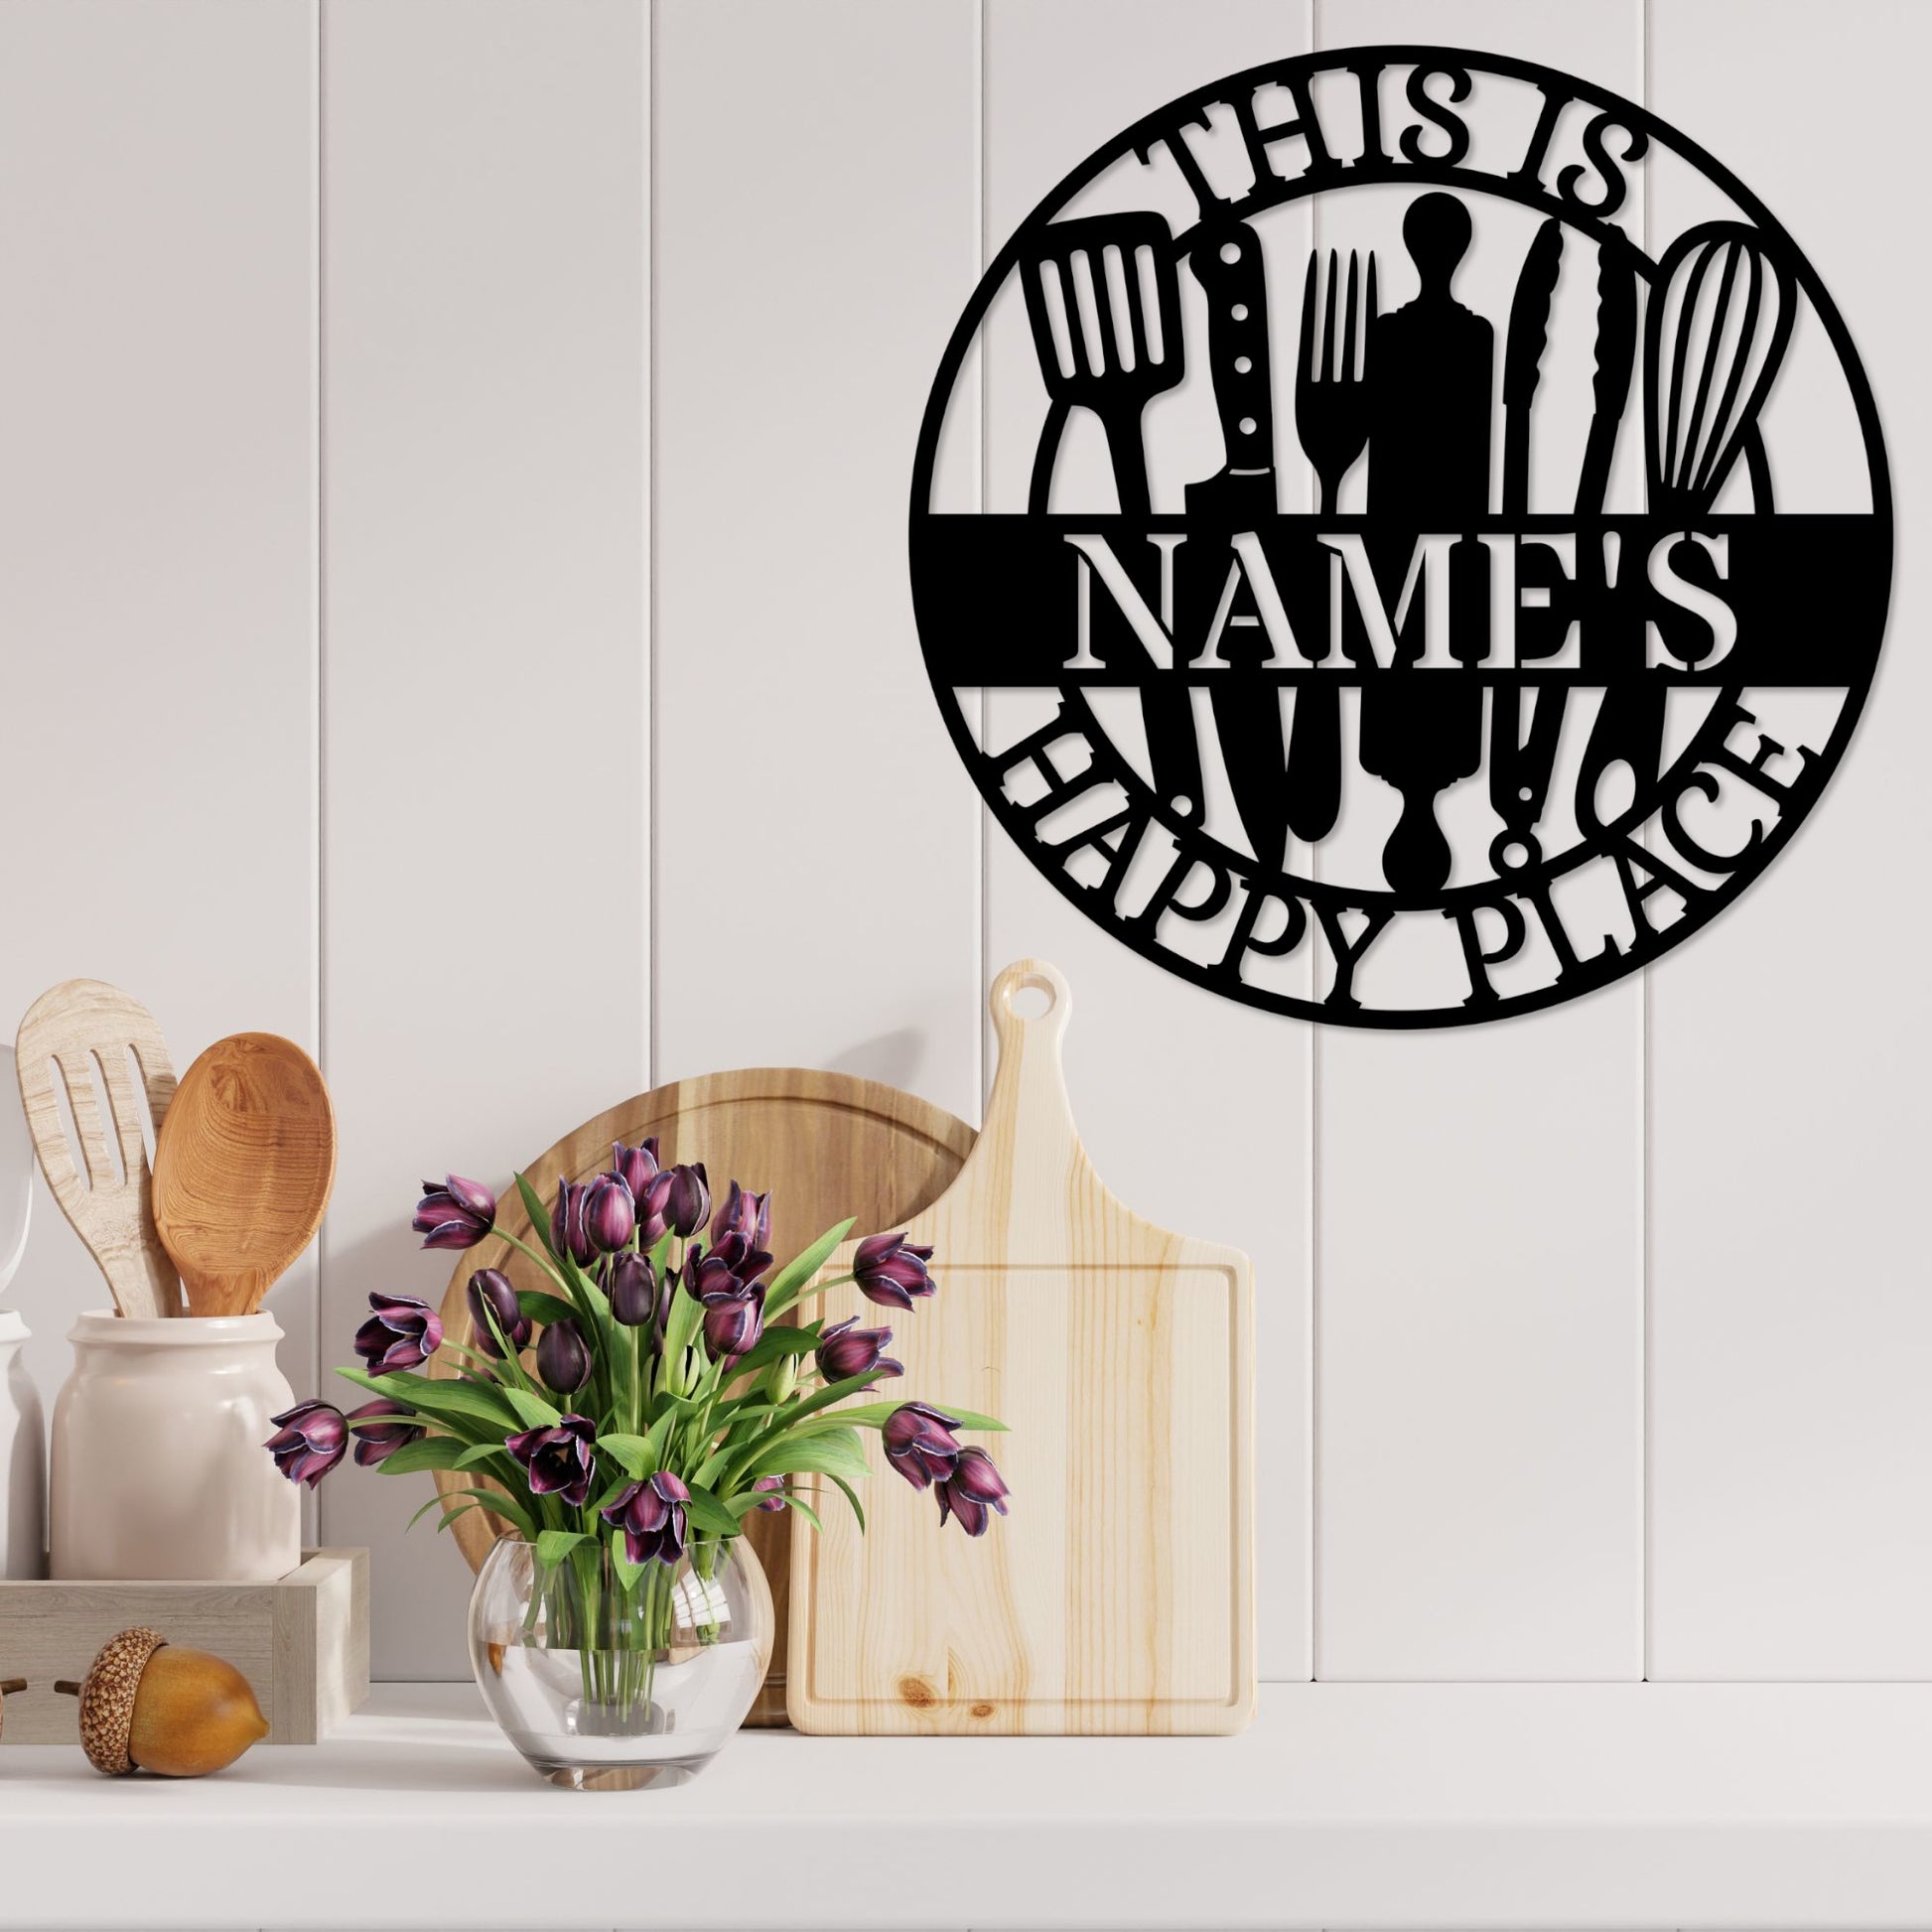 Personalized Kitchen Name Metal Art Sign. Custom Kitchen Chief Wall Decor Gift. Wall Hanging Decoration. Food Lover. Unique Present For Cook